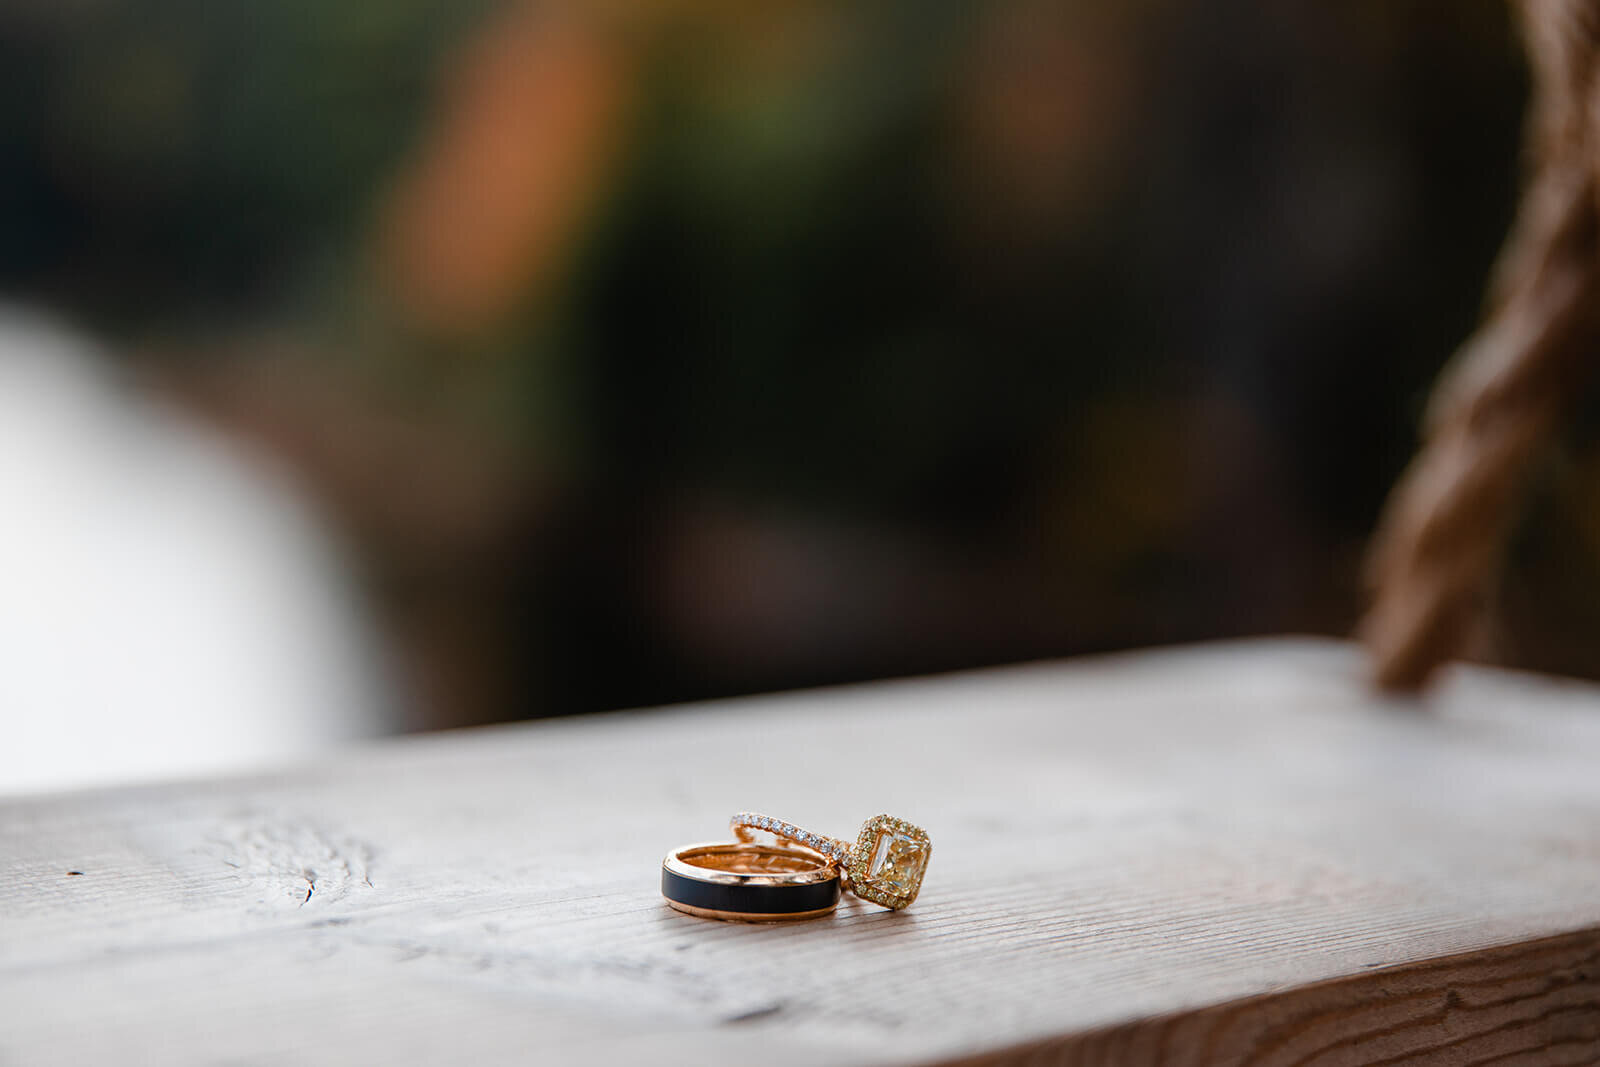  Wedding rings including the bride’s gorgeous yellow diamond ring. Adirondack small outdoor wedding Upstate NY. 